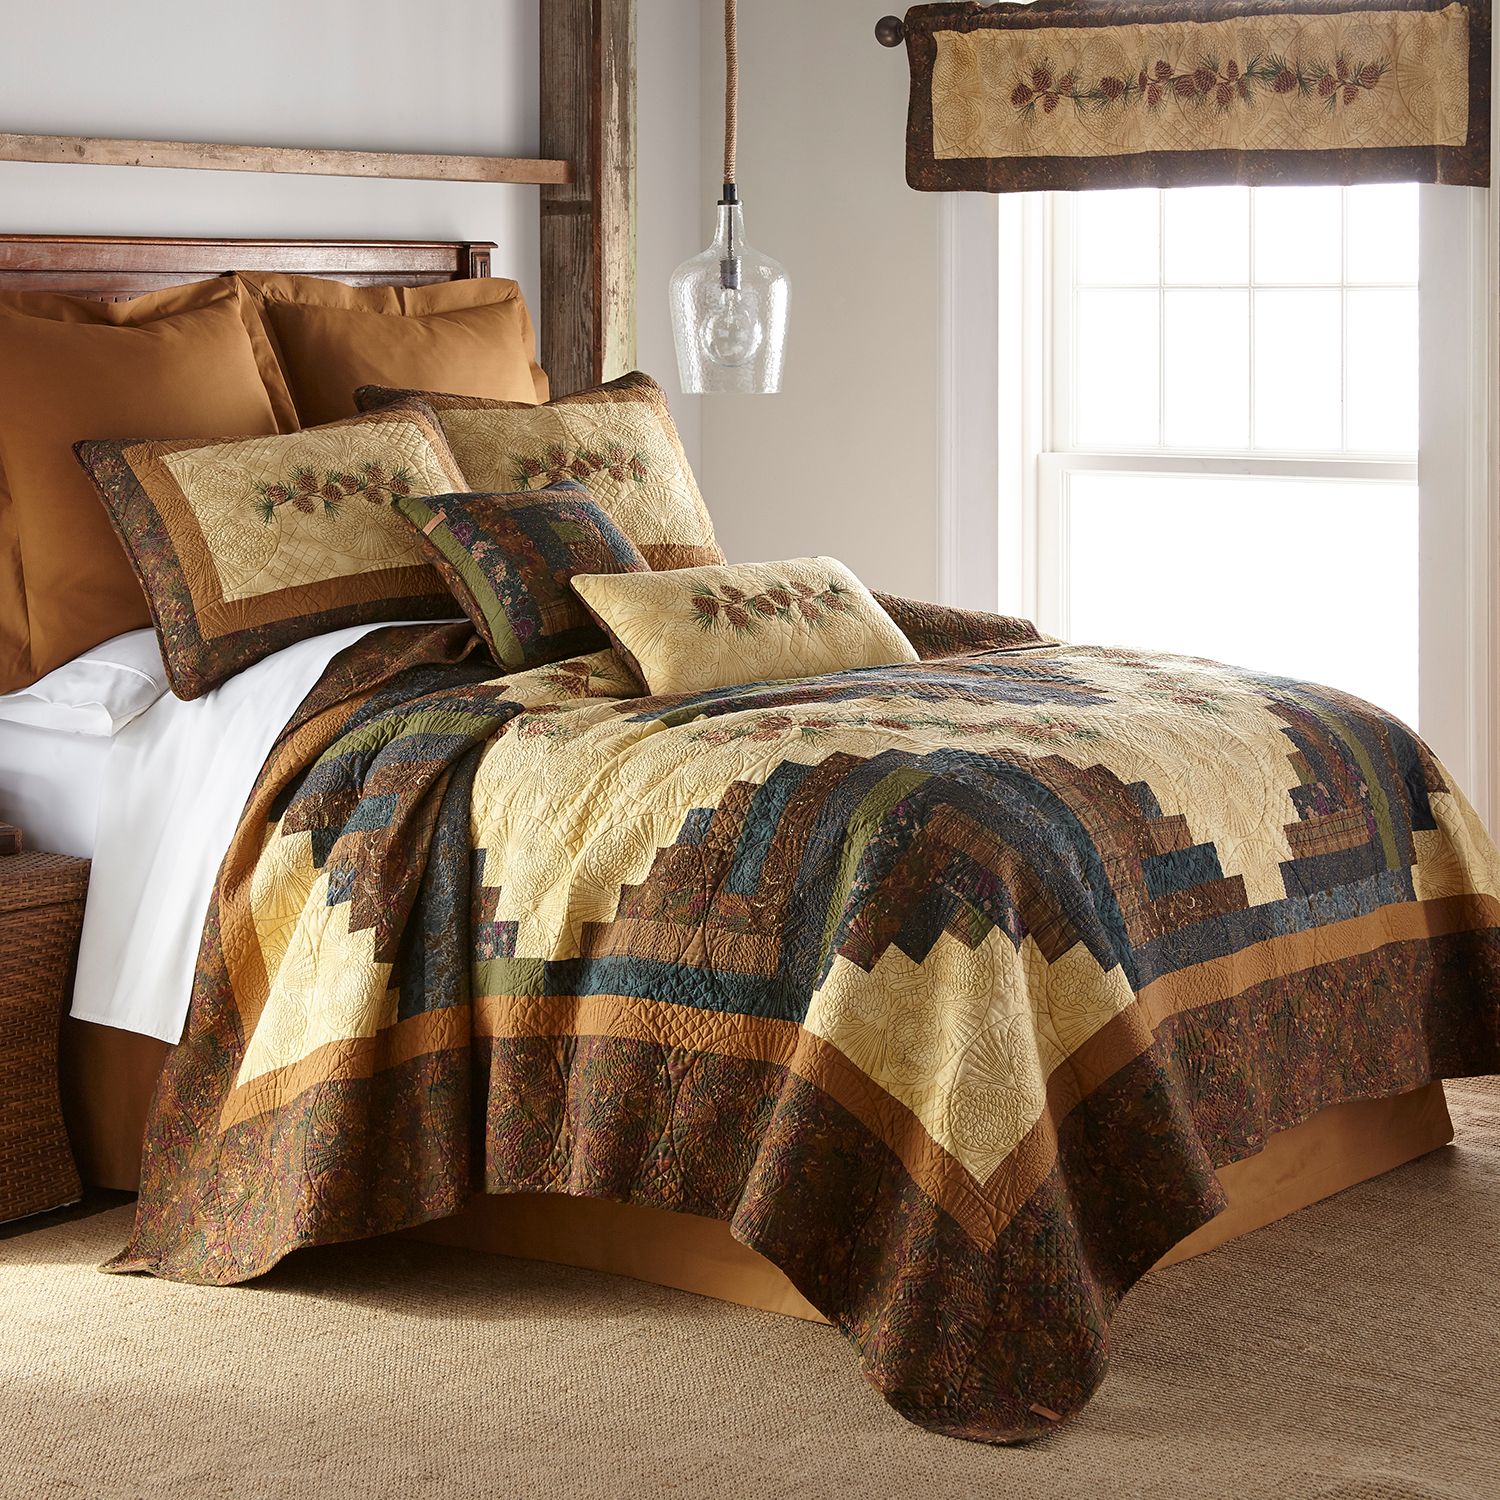 Image for Donna Sharp Cabin Raising Pine Cone Quilt or Sham at Kohl's.